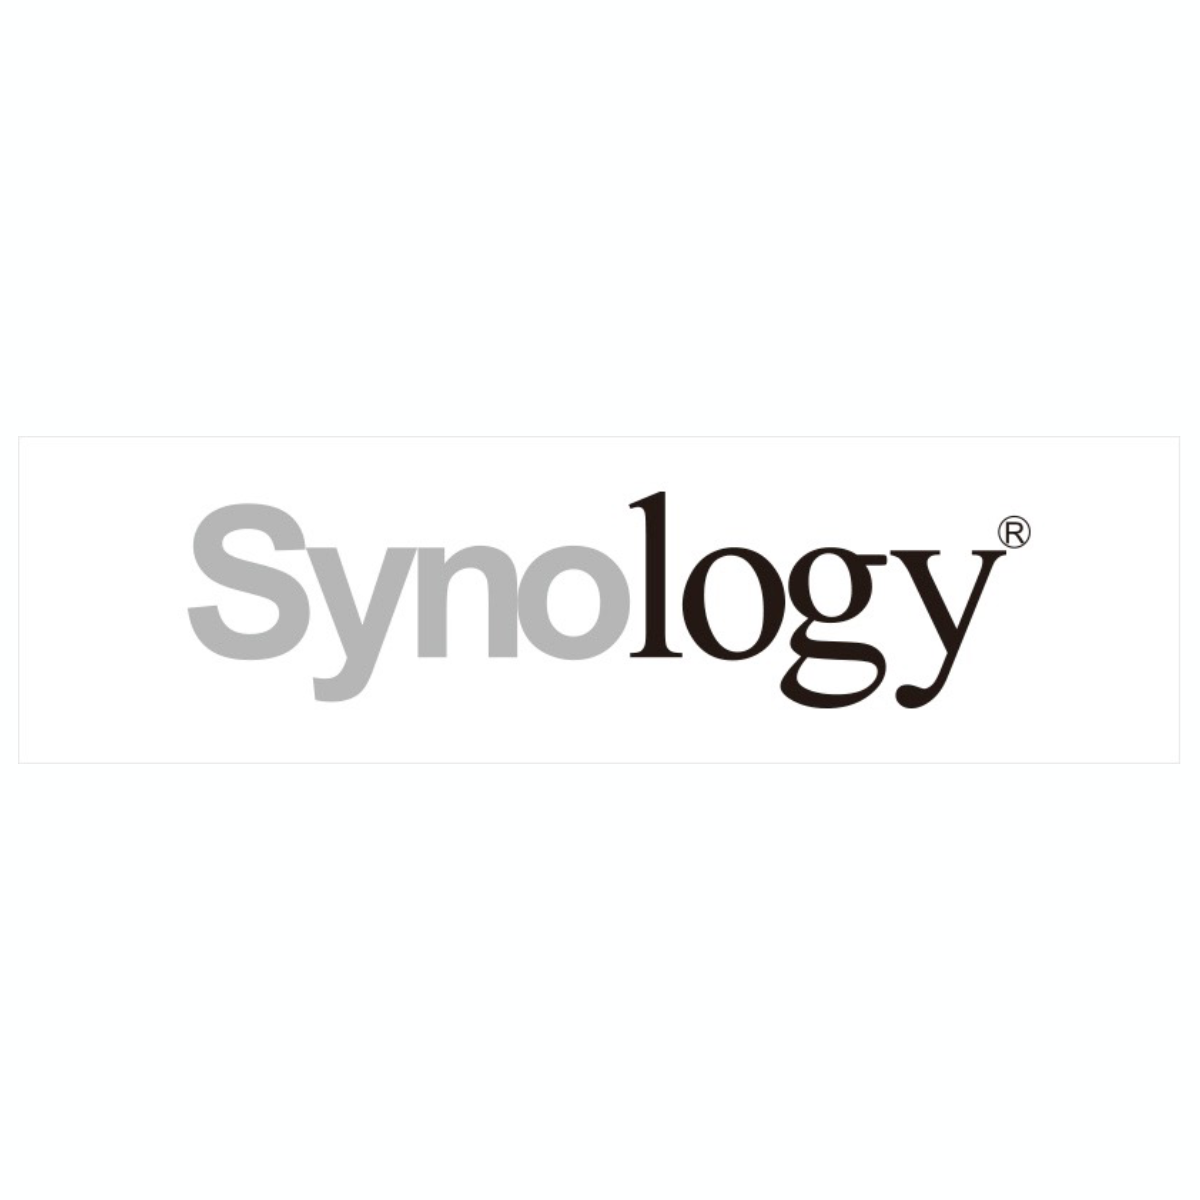 Synology.png